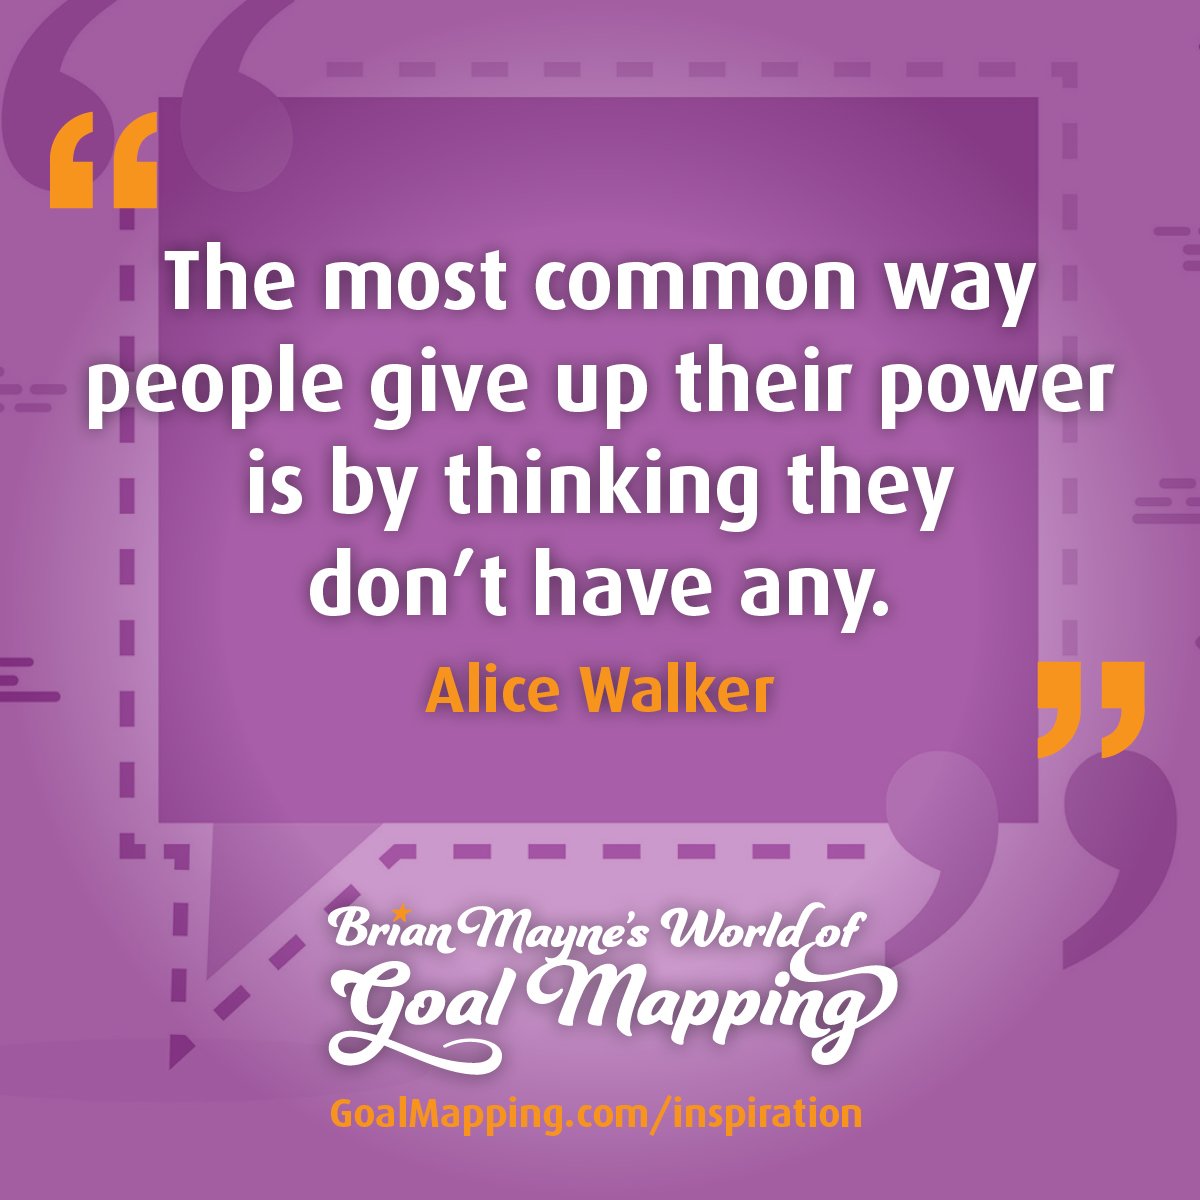 "The most common way people give up their power is by thinking they don’t have any." Alice Walker